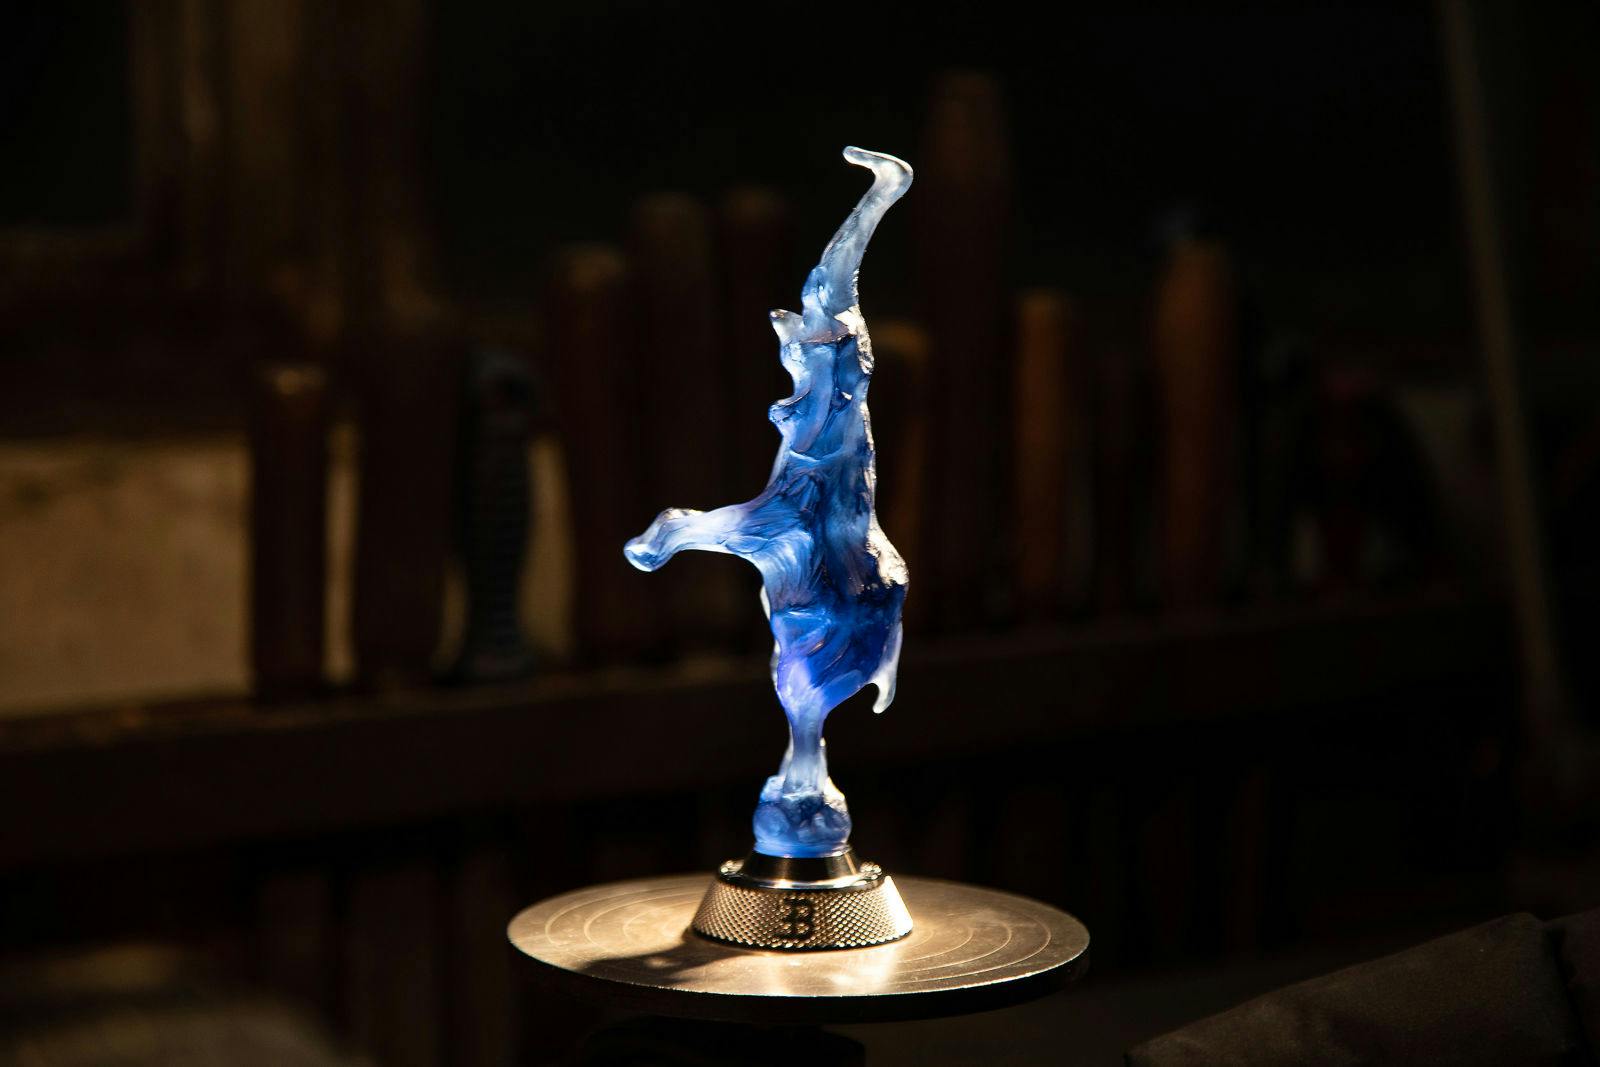 The ‘Dancing Elephant’ crystal sculpture by Lalique is inspired by Rembrandt Bugatti's ‘Dancing Elephant’.